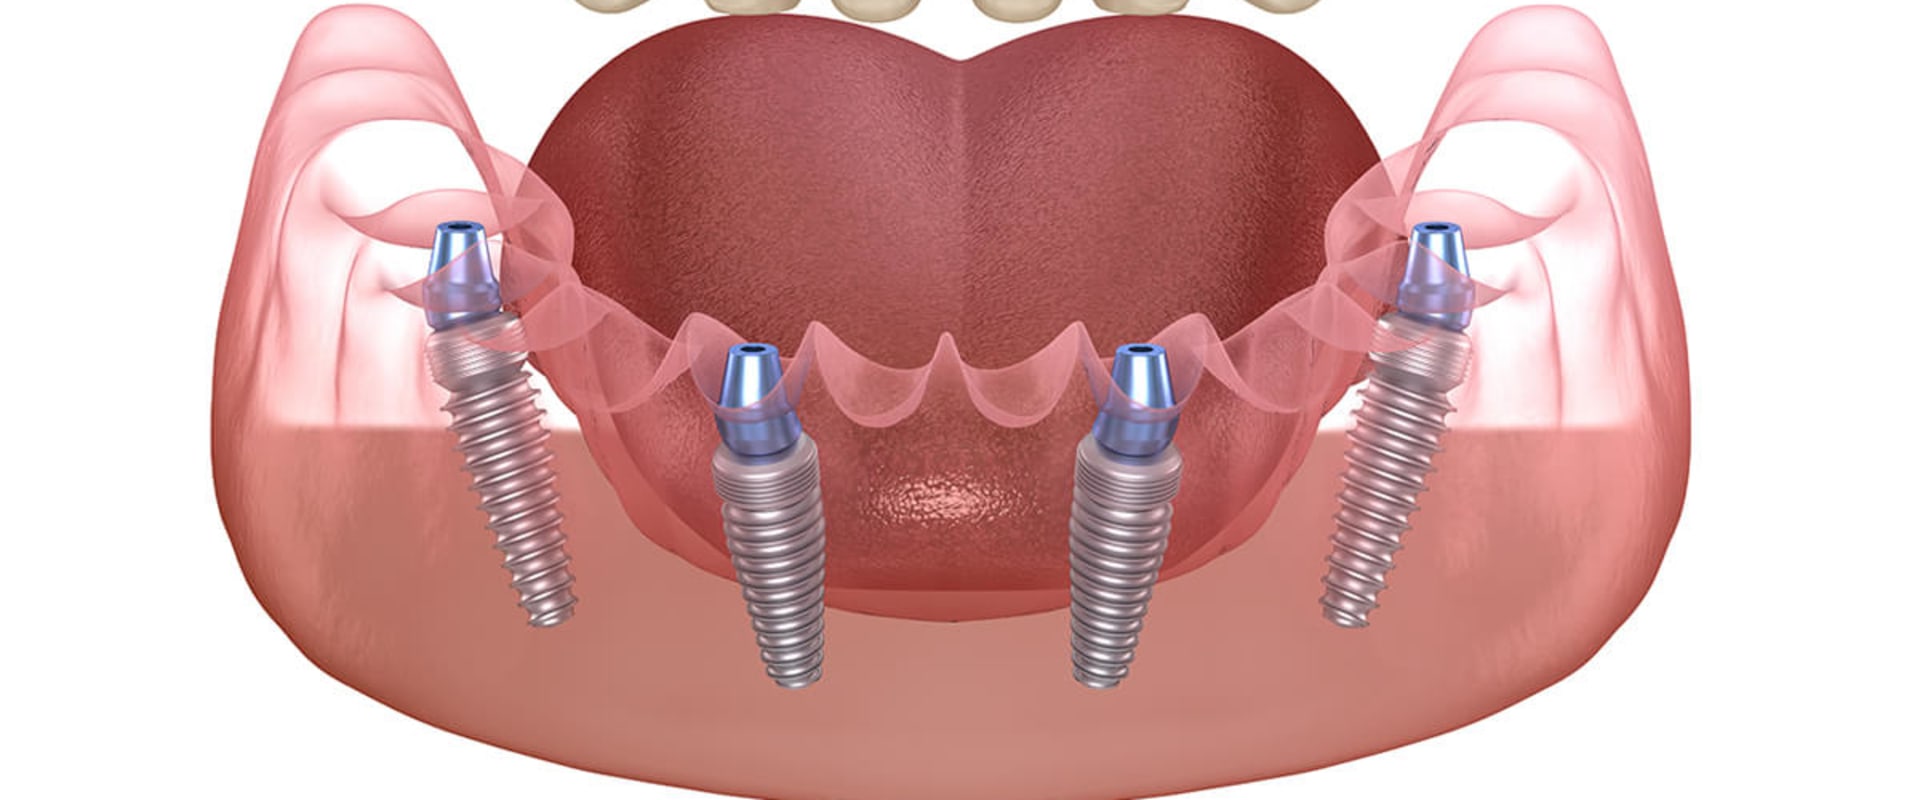 What are the Risks and Benefits of All-on-4 Dental Implants?